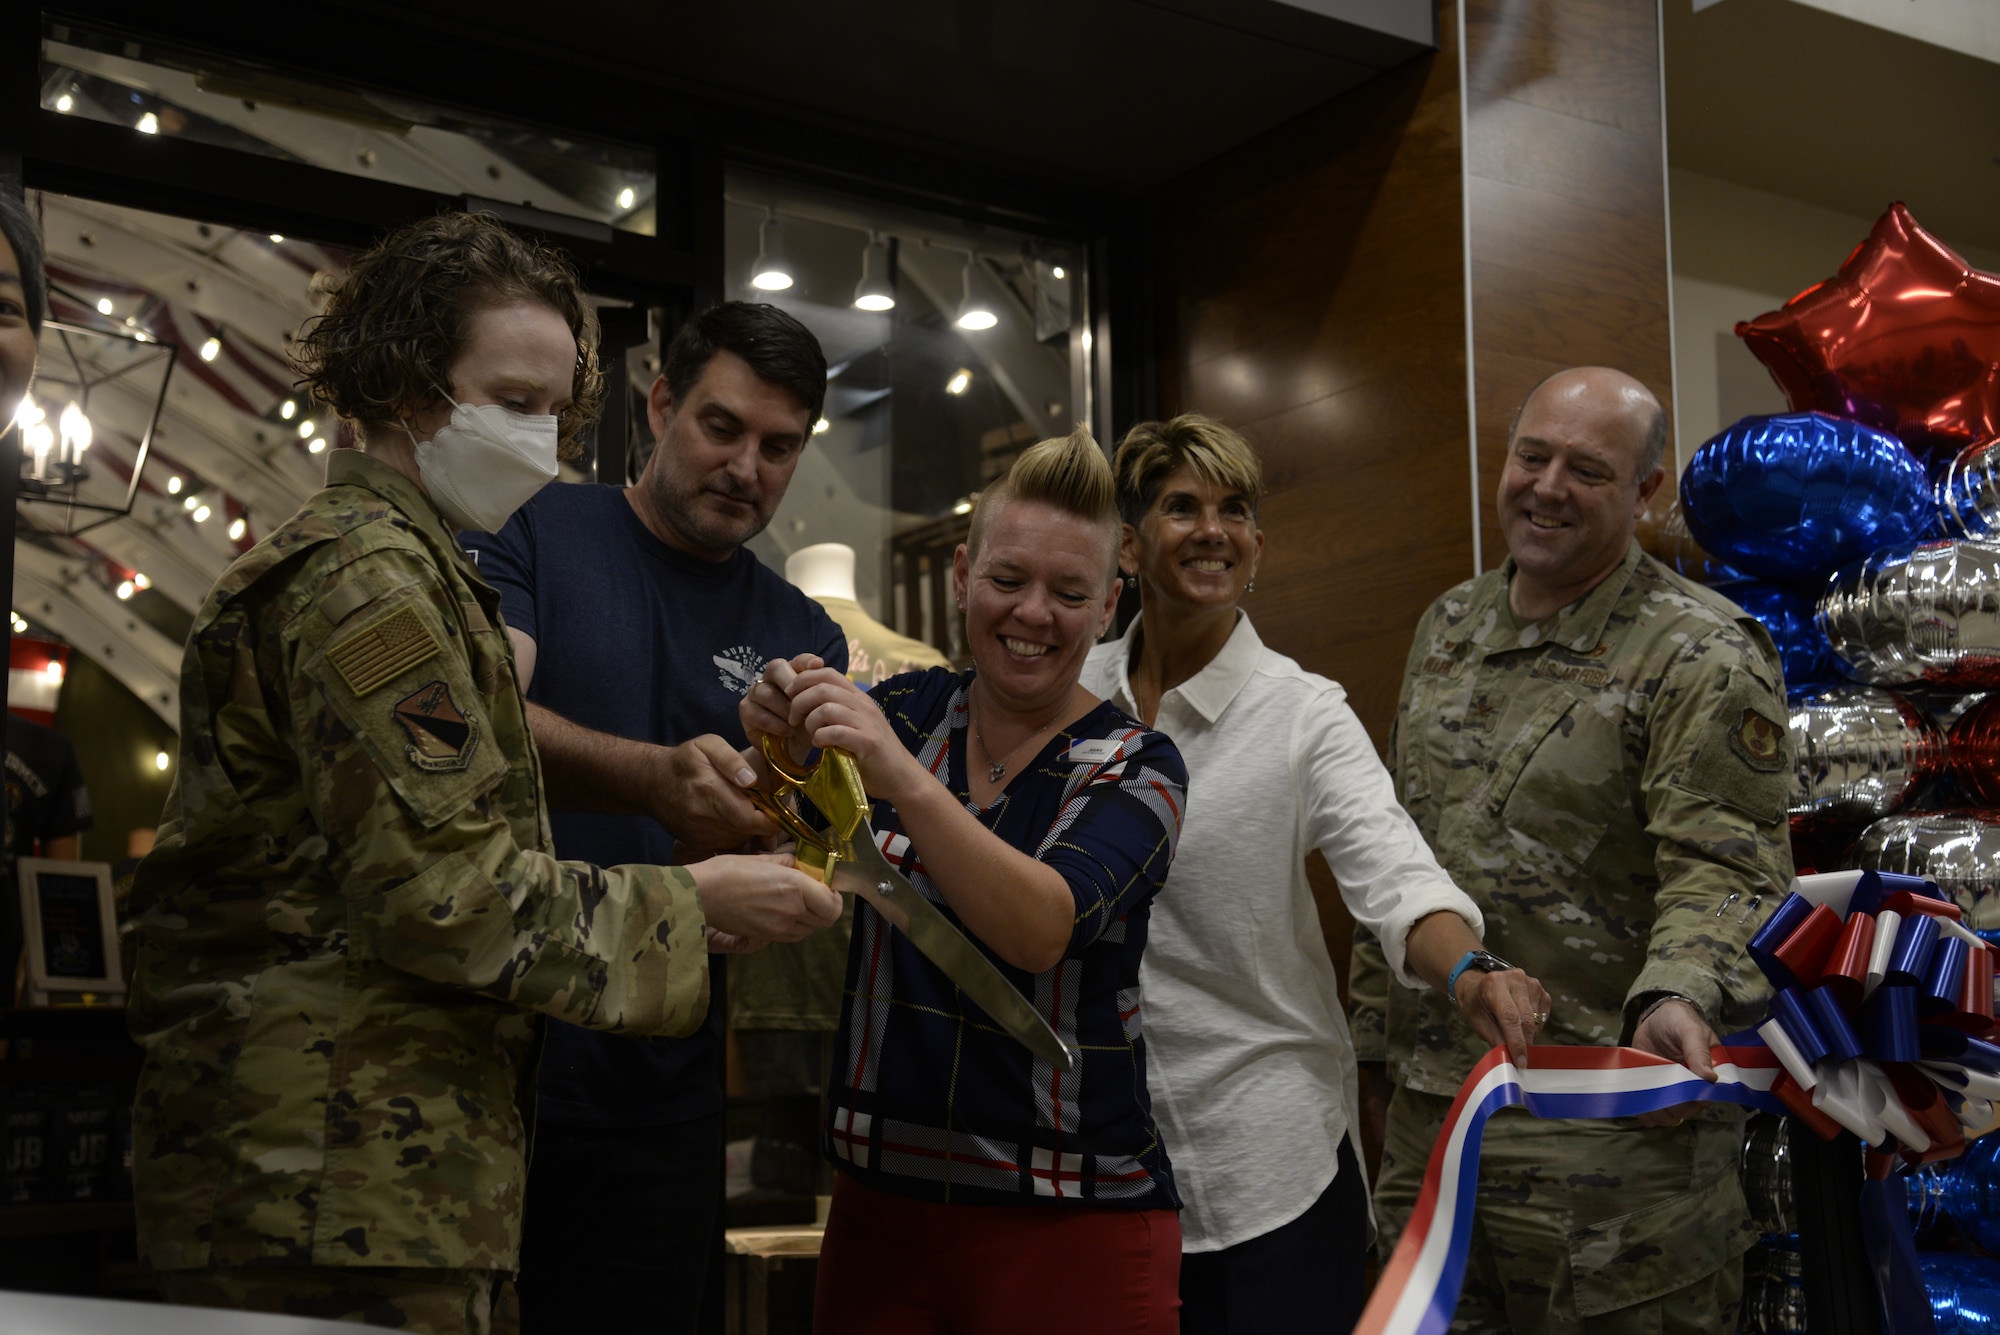 From left: Col. Sirena Morris, 88th Mission Support Group commander; Darren Moore, Bunker 27 founder and owner; Sarah Bateman, Base Exchange services business manager; Elizabeth Goodman-Bluhm, the Army & Air Force Exchange Service’s Central Region vice president; and Col. Patrick Miller, 88th Air Base Wing and installation commander, cut the ribbon July 15 on the new Bunker 27 at Wright-Patterson Air Force Base. (U.S Air Force photo by Airman 1st Class Jack Gardner)